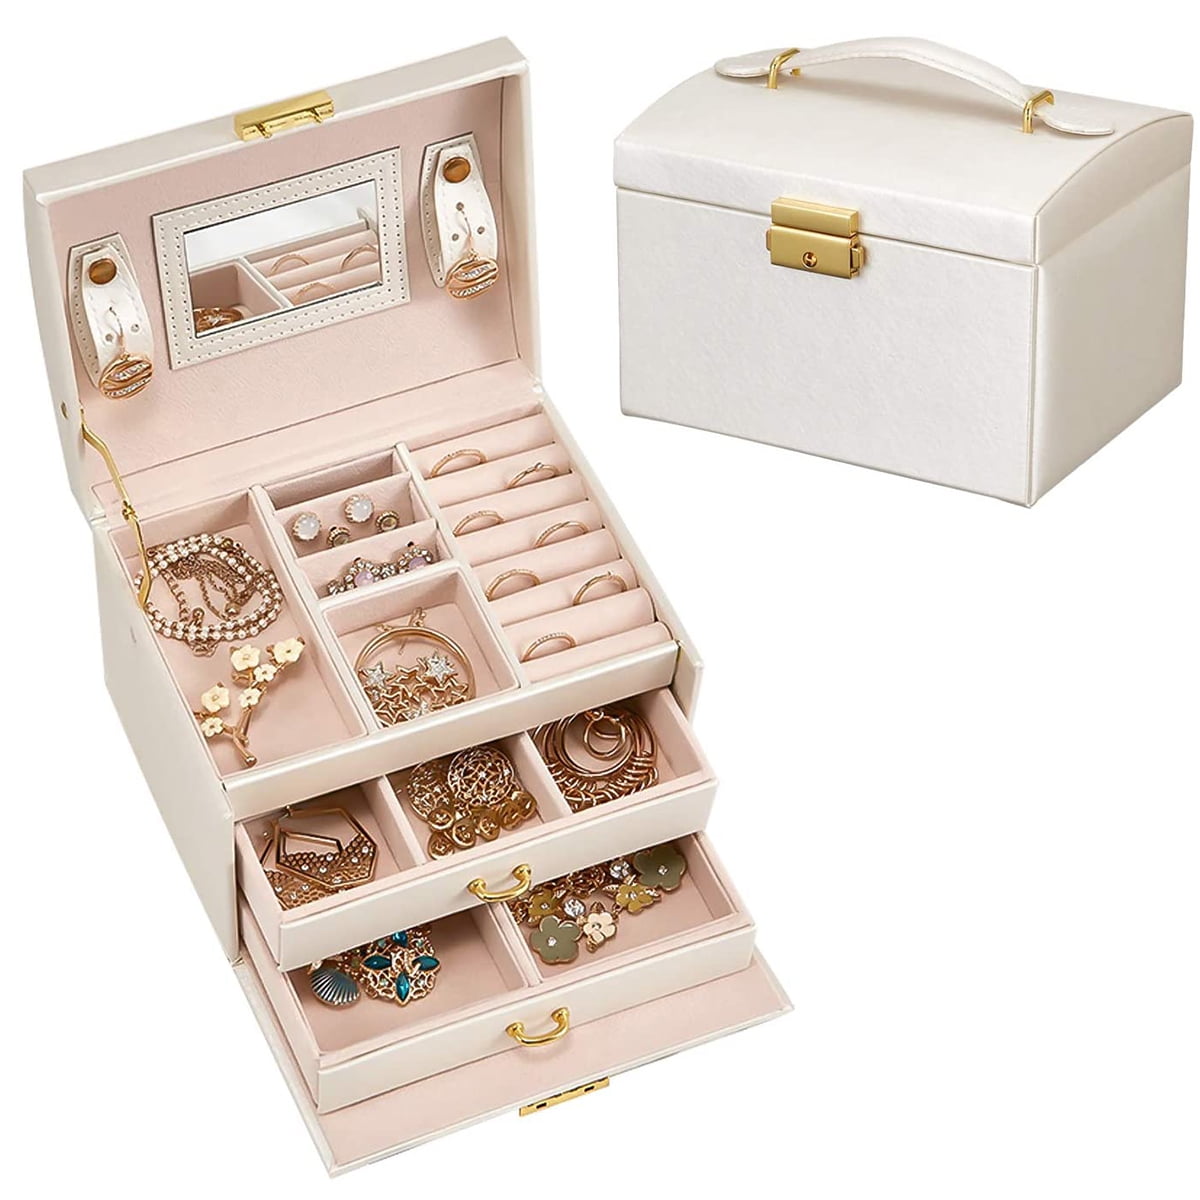 Jewelry Box Jewelry Organizer Box Display Storage Case Holder with Two Layers Lock Mirror Women Girls Leather Jewelry Box for Earrings Rings Necklaces Bracelets Earrings Gift Black